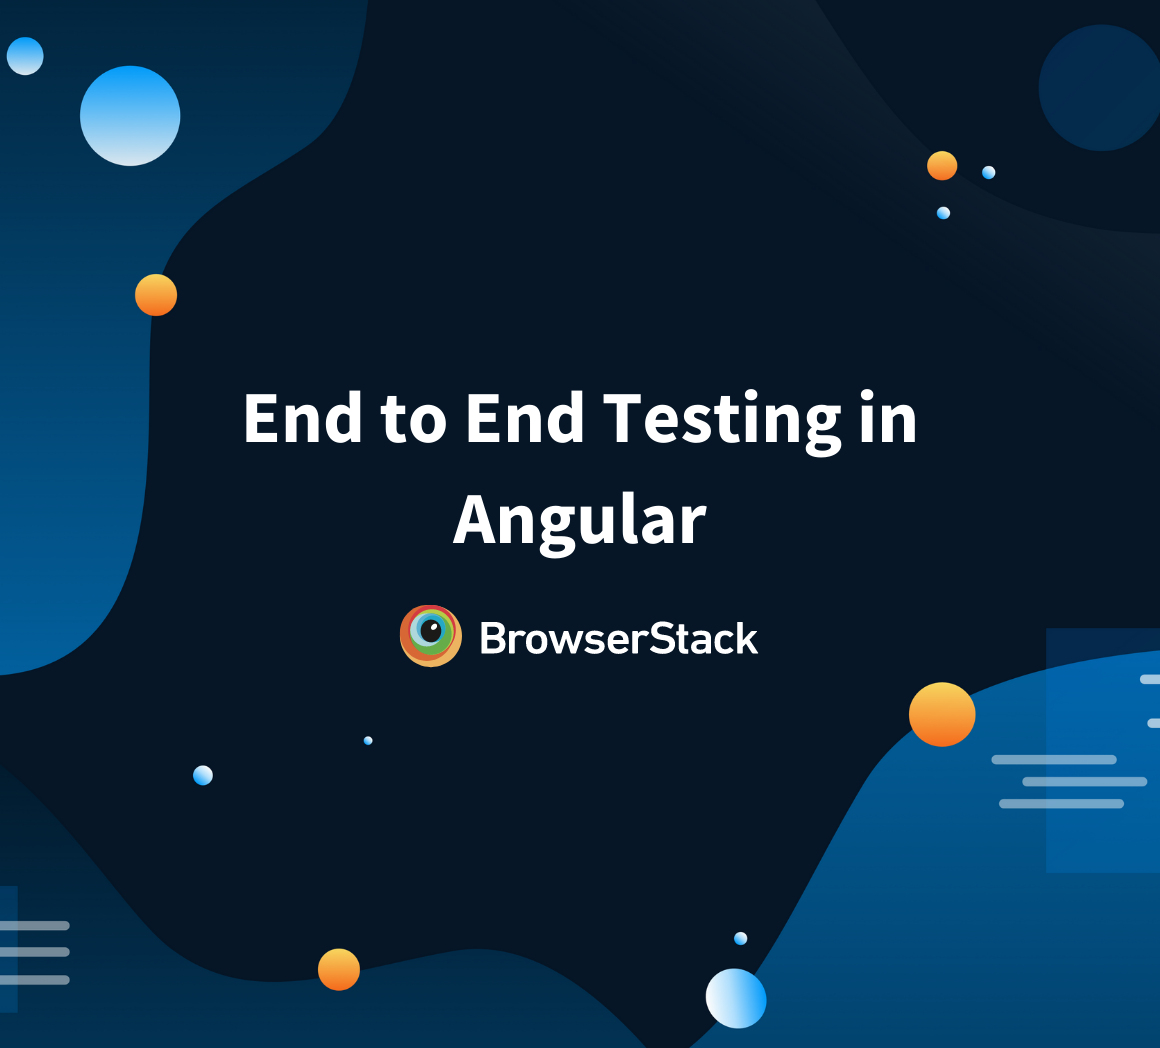 End to End Testing in Angular